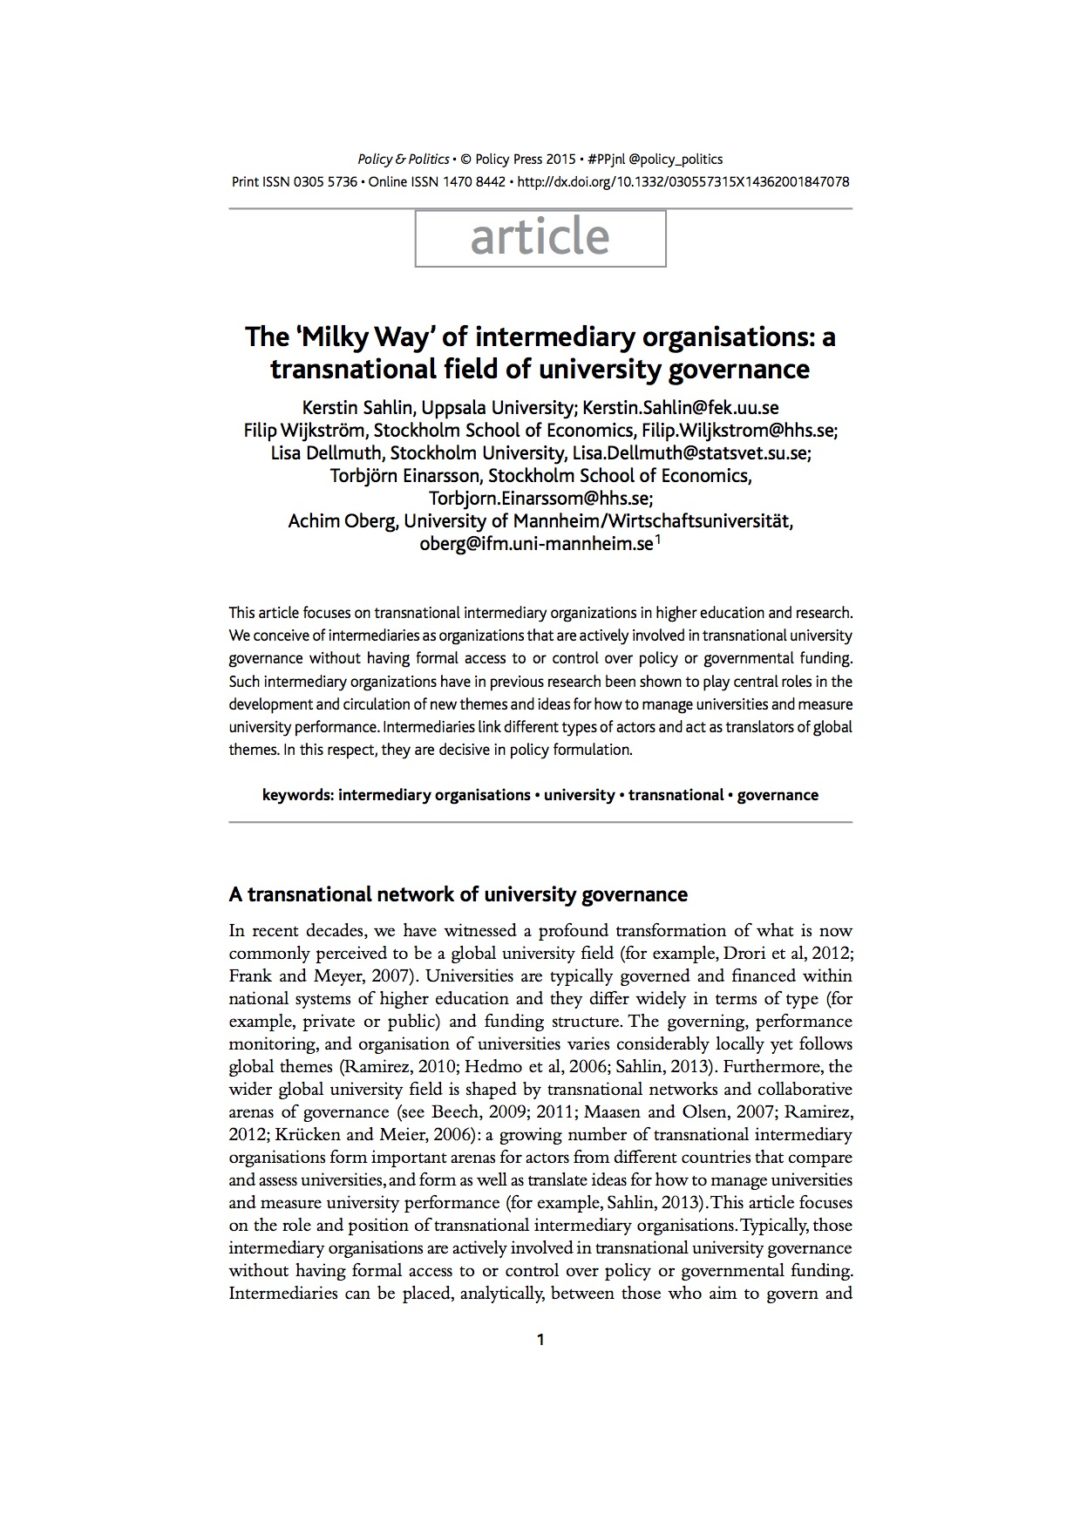 The ‘Milky Way’ of intermediary organisations: a transnational field of university governance